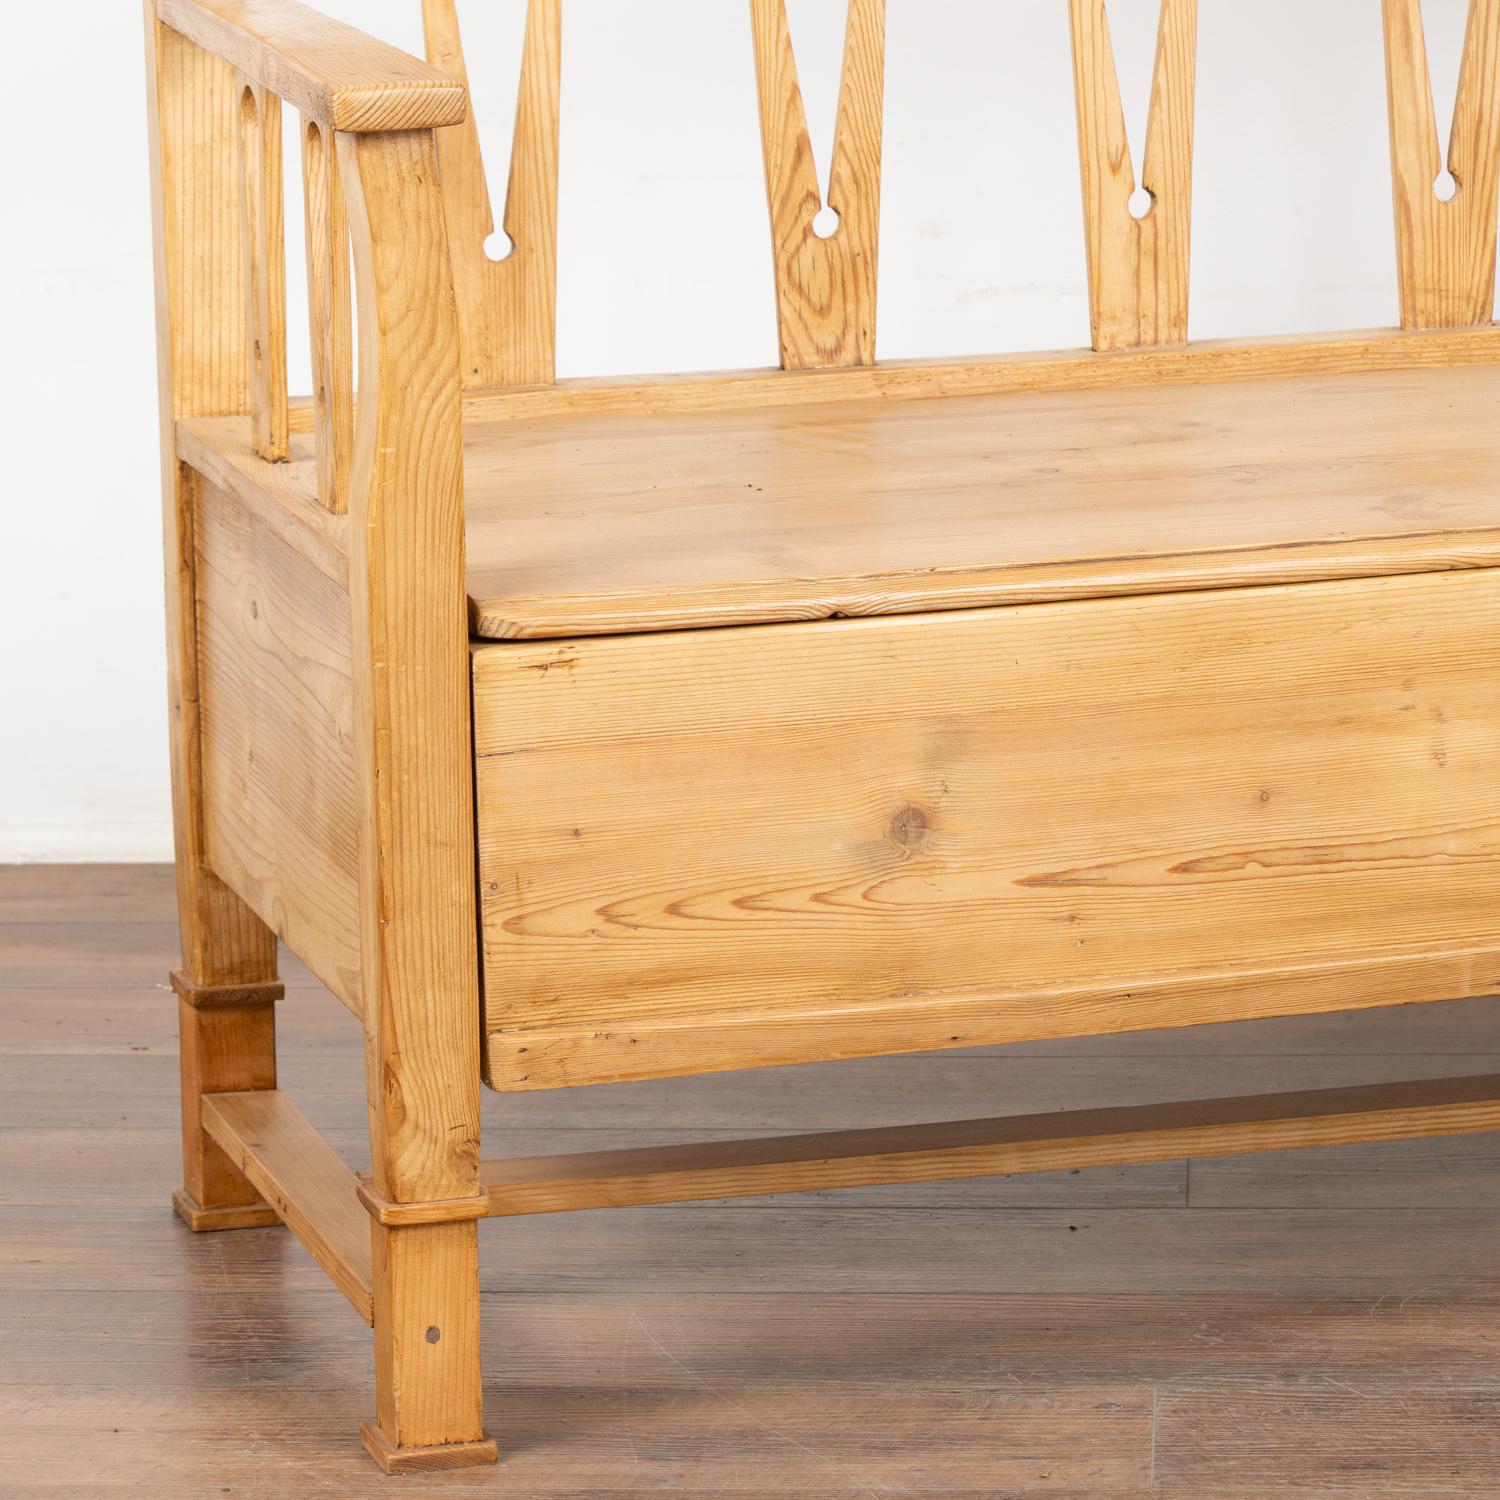 19th Century Pine Bench With Storage, Sweden circa 1880 For Sale